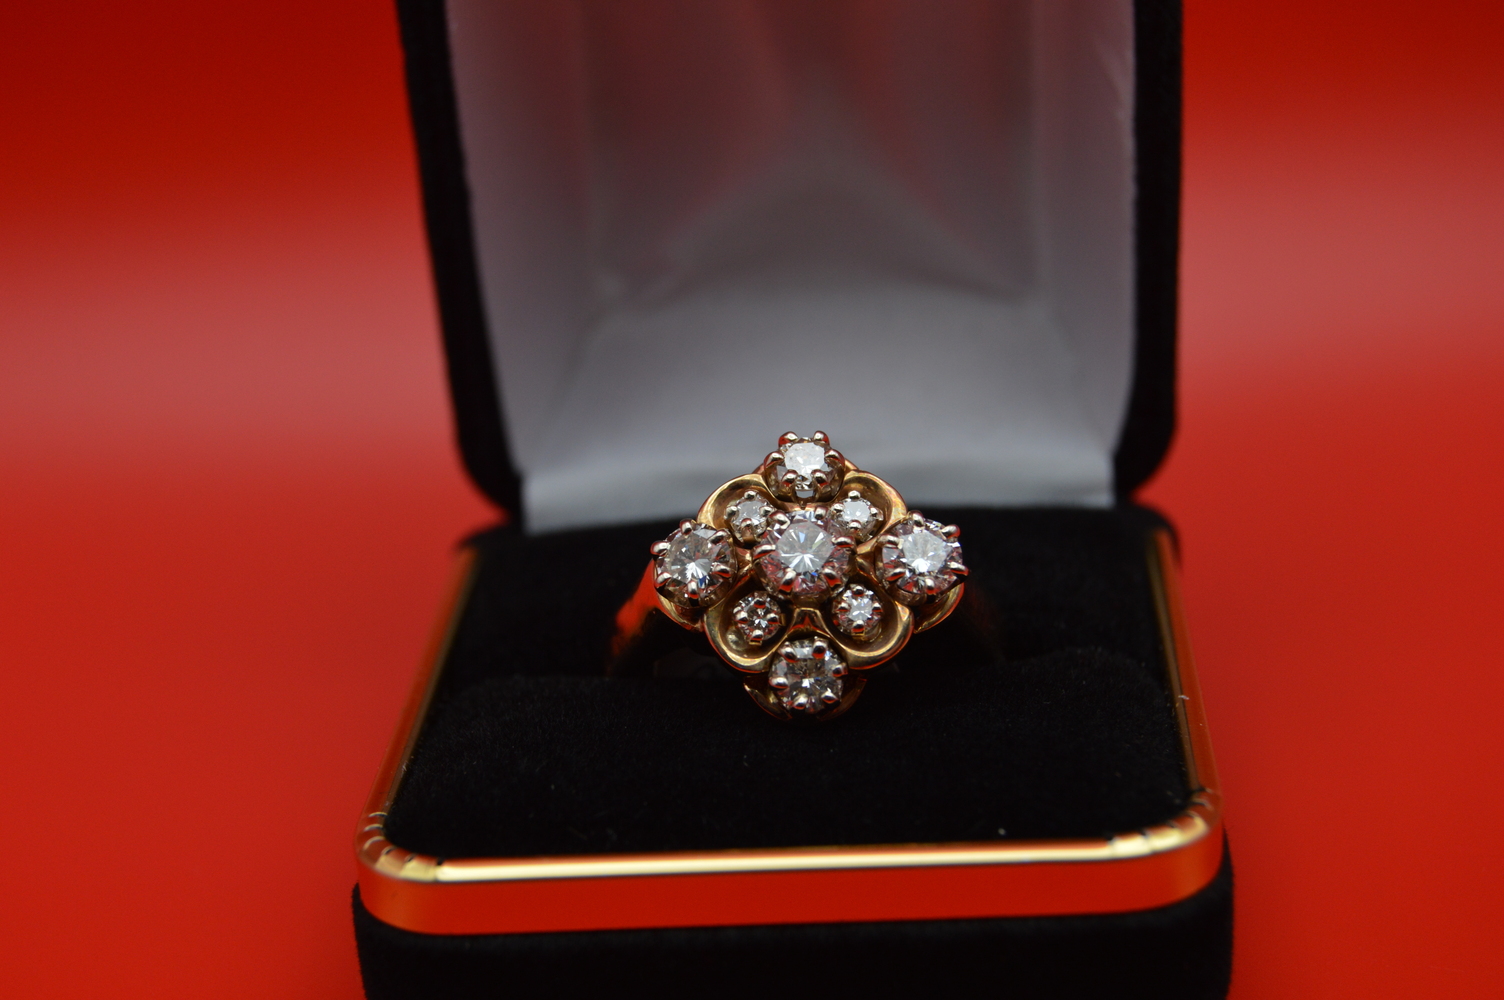  !4kt  Yellow Gold Cluster Diamond Ring